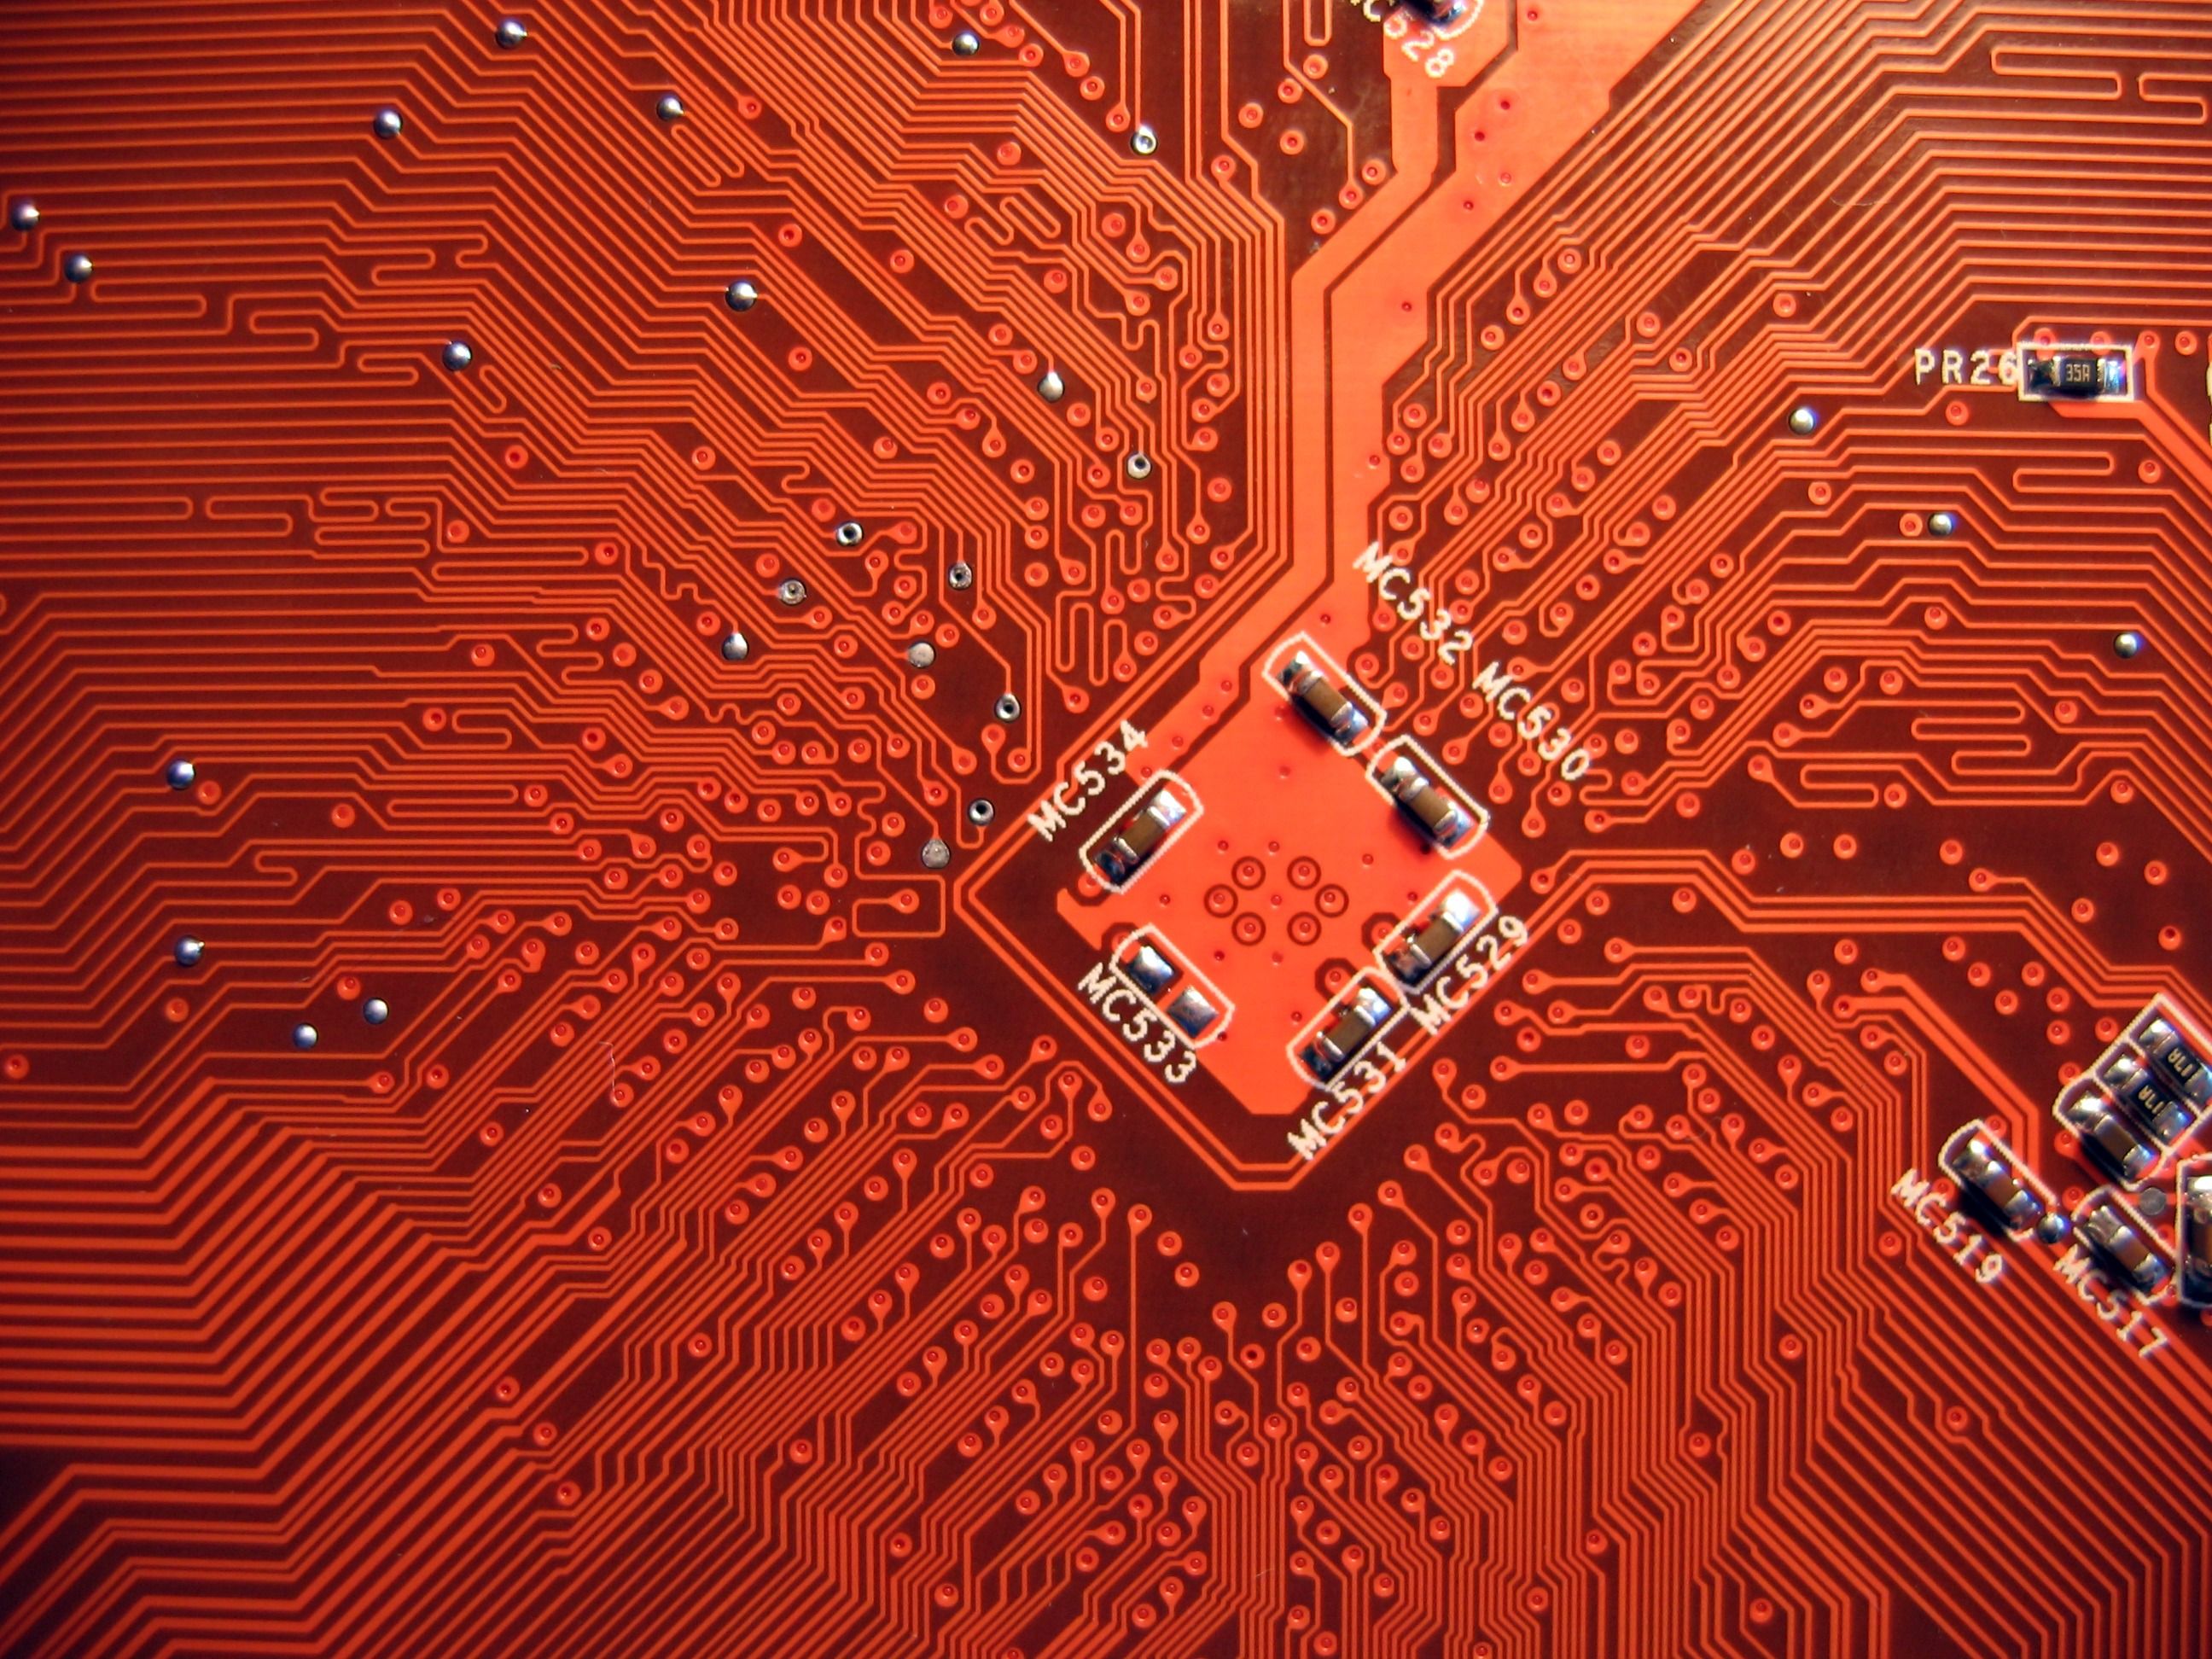 computers, technology, pcb, circuits, computers components